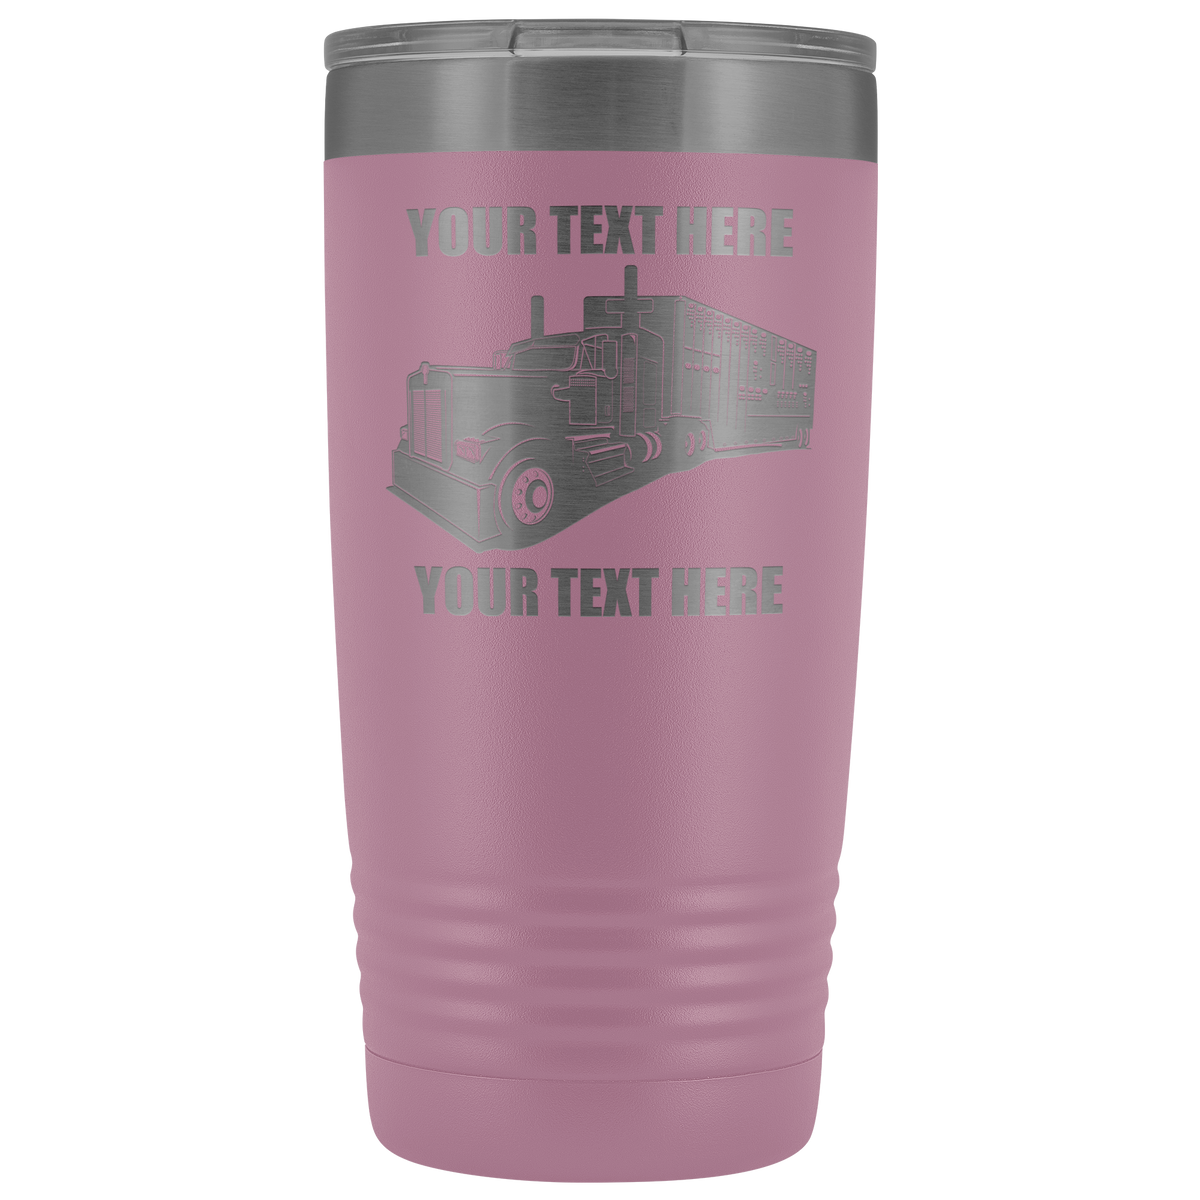 💗 EVERYTHING PINK! NEW YETI POWER PINK COLLECTION JUST DROPPED! 💗  Coolers, mugs, tumblers, and so much more NOW AVAILABLE! 🔗 LINK IN…